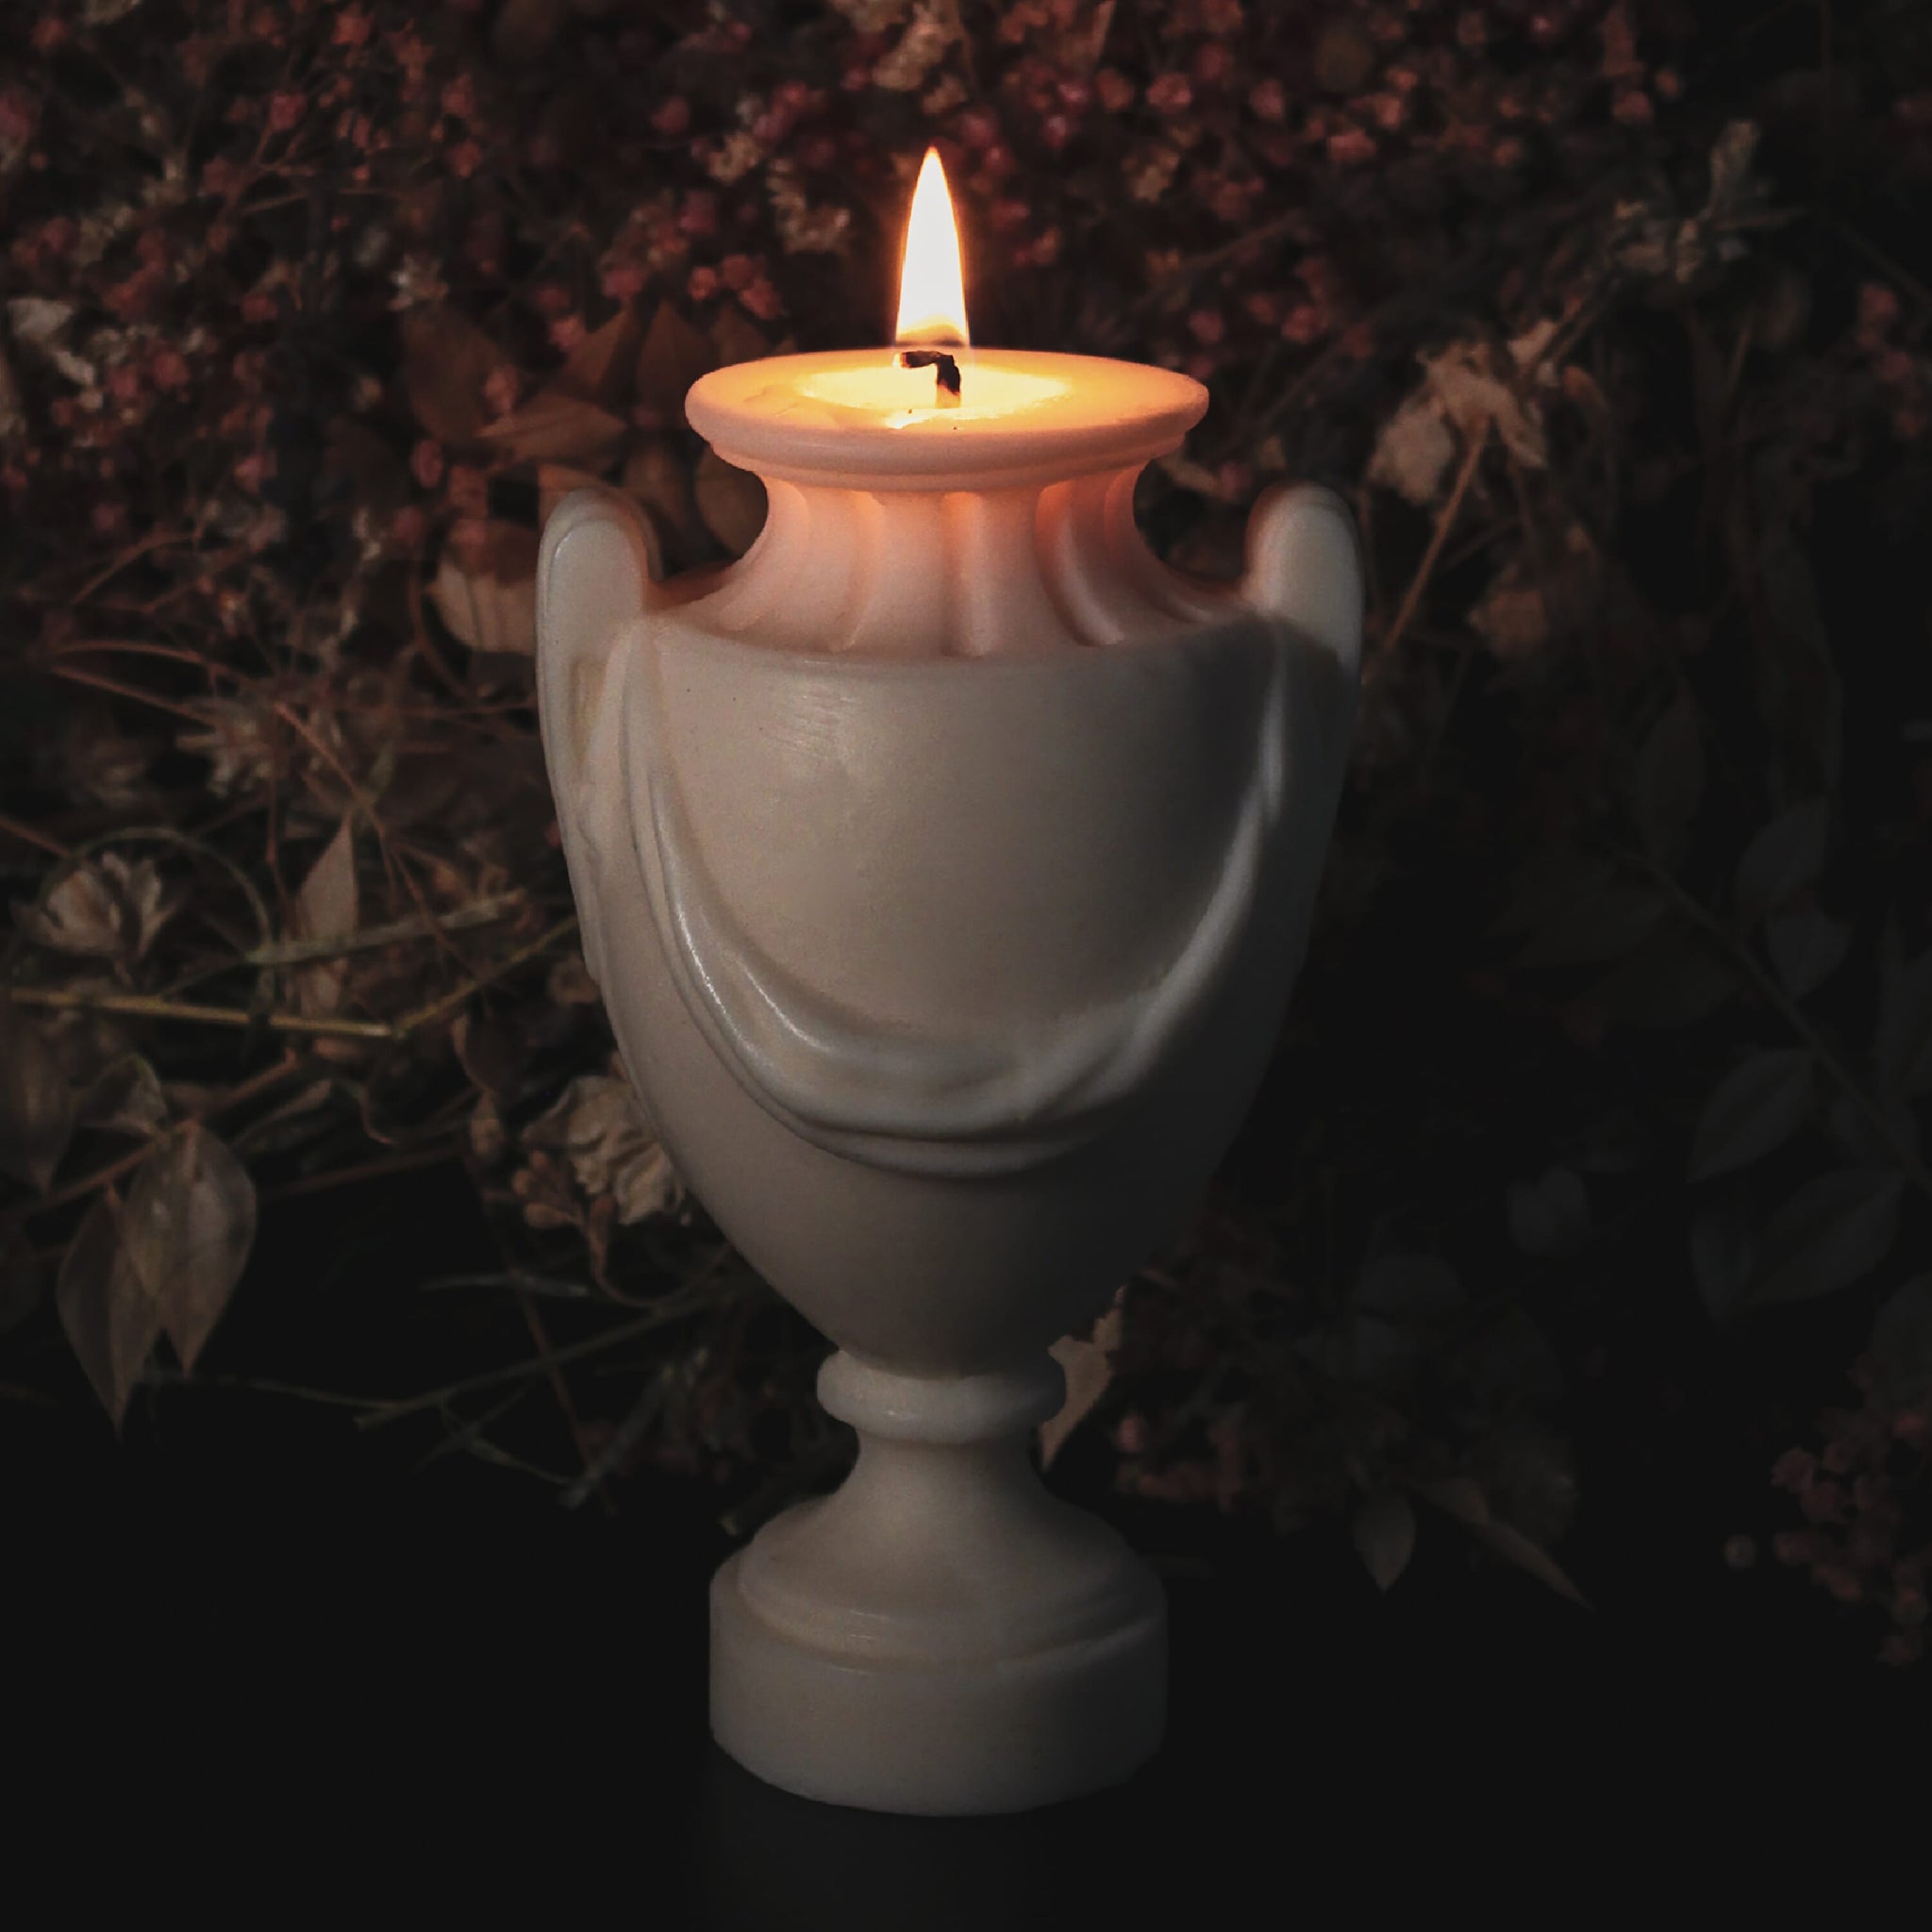 The Urn large gothic candle